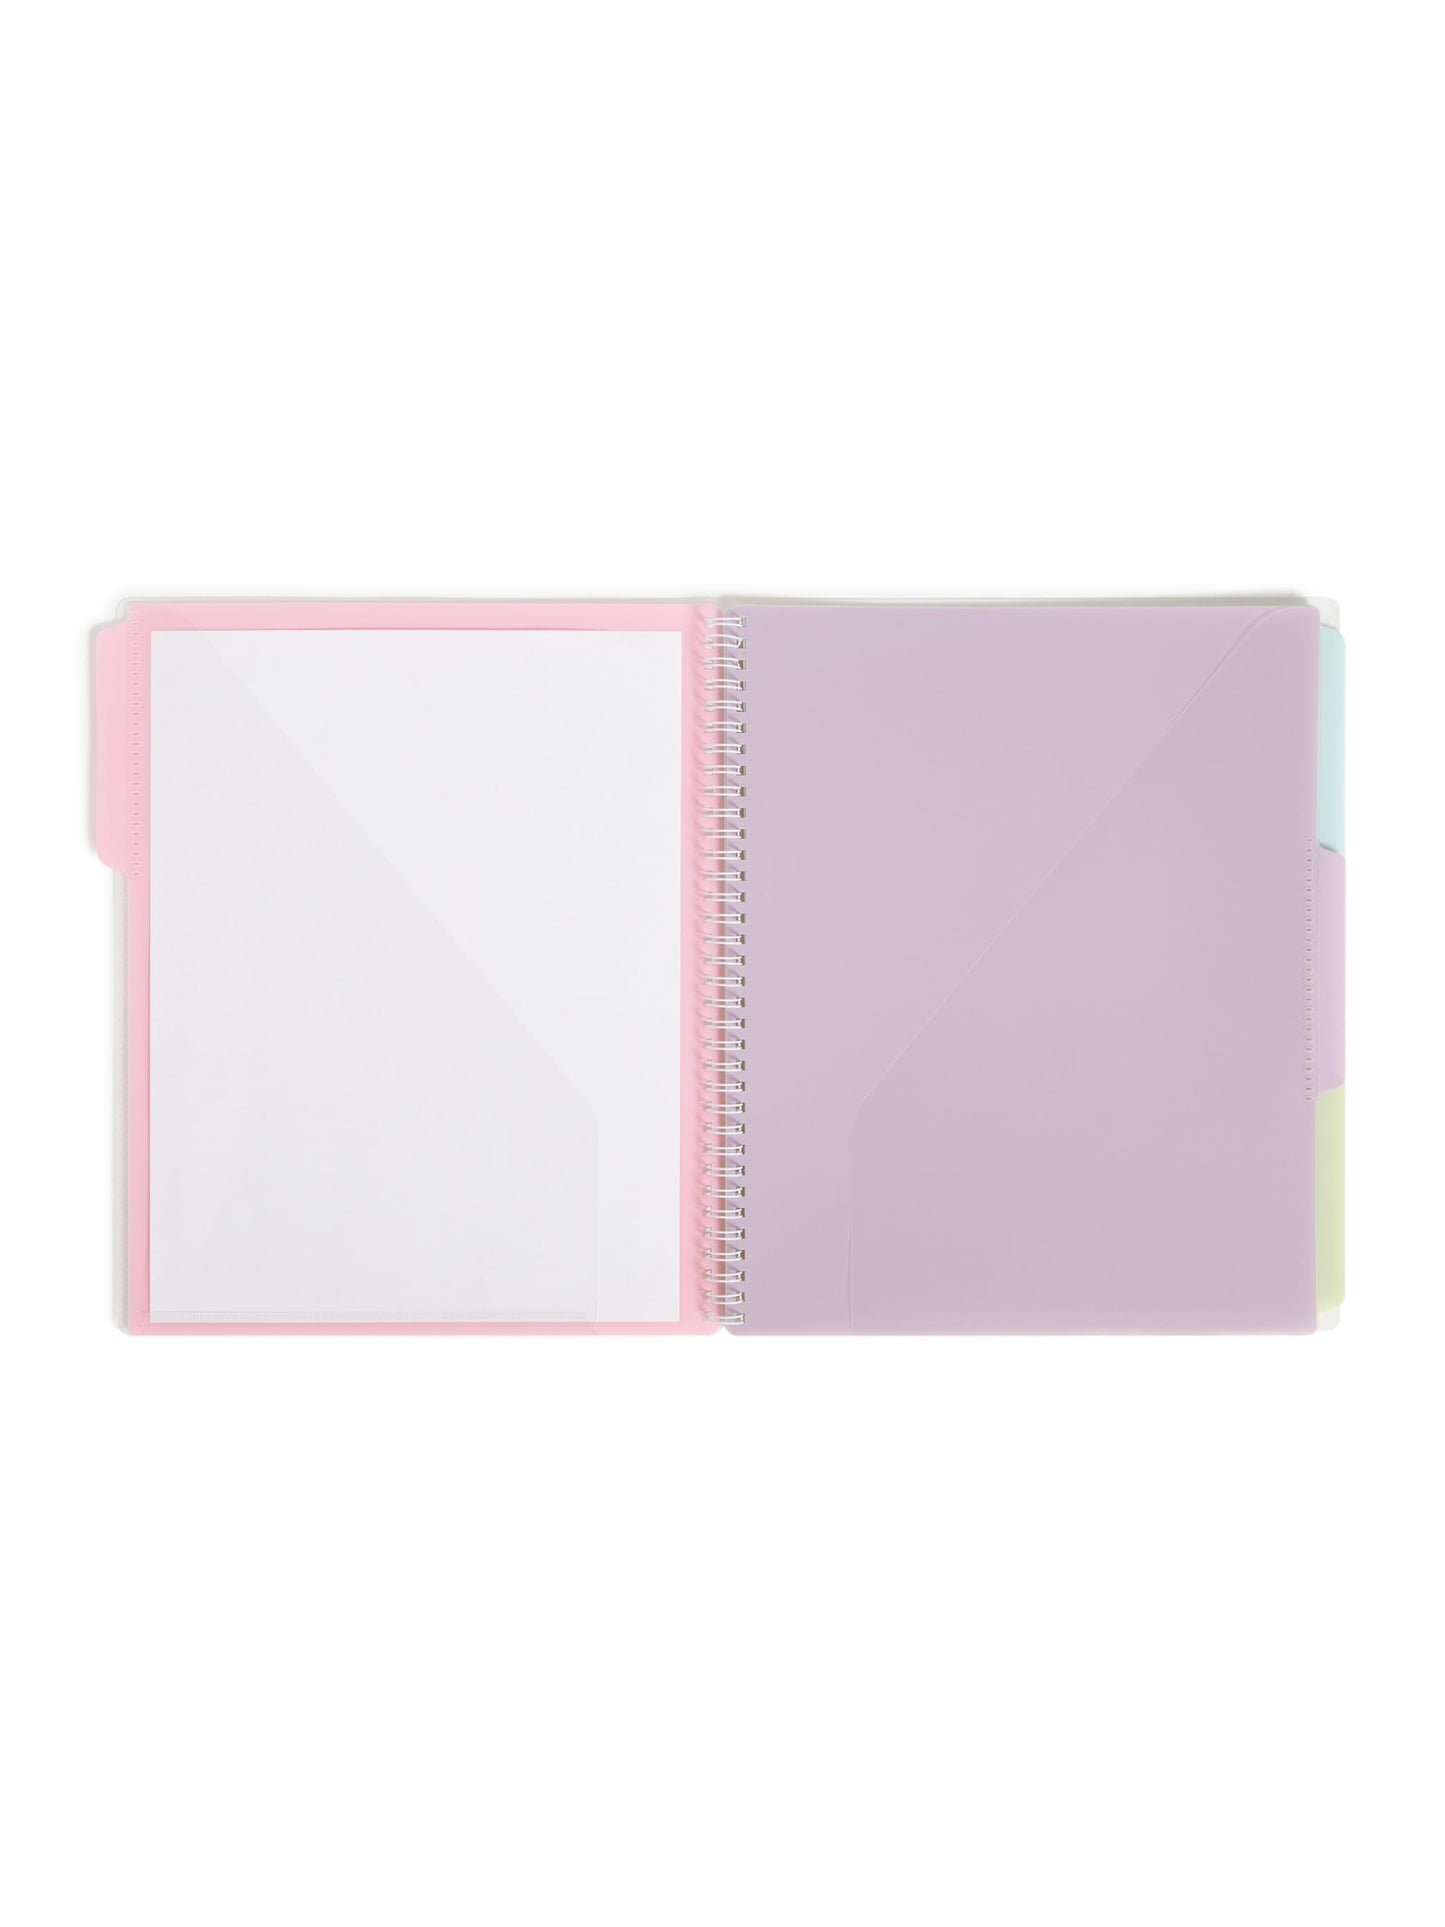 Project Organizer, 12 Pockets, 6 Dividers, 1/3-Cut Tab, Assorted Colors Color, Letter Size, Set of 1, 086486892087